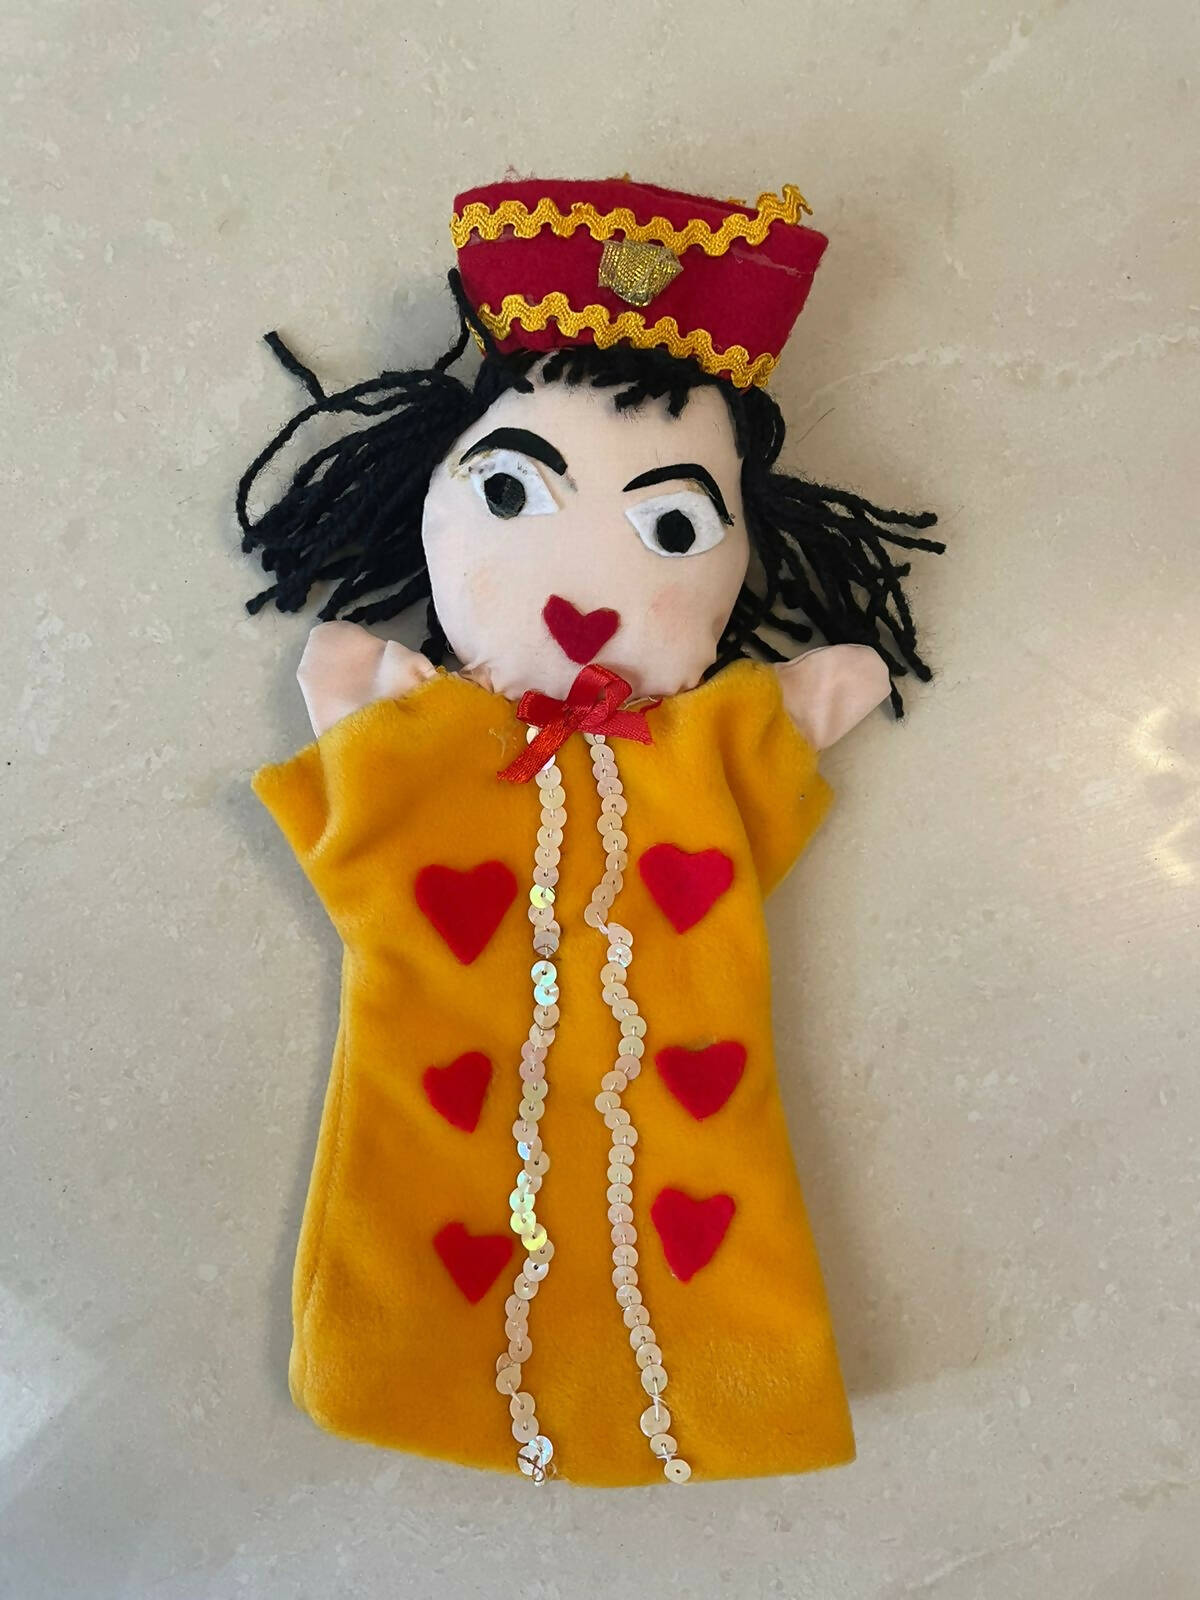 Mrs. Heart Upcycled Hand Puppet